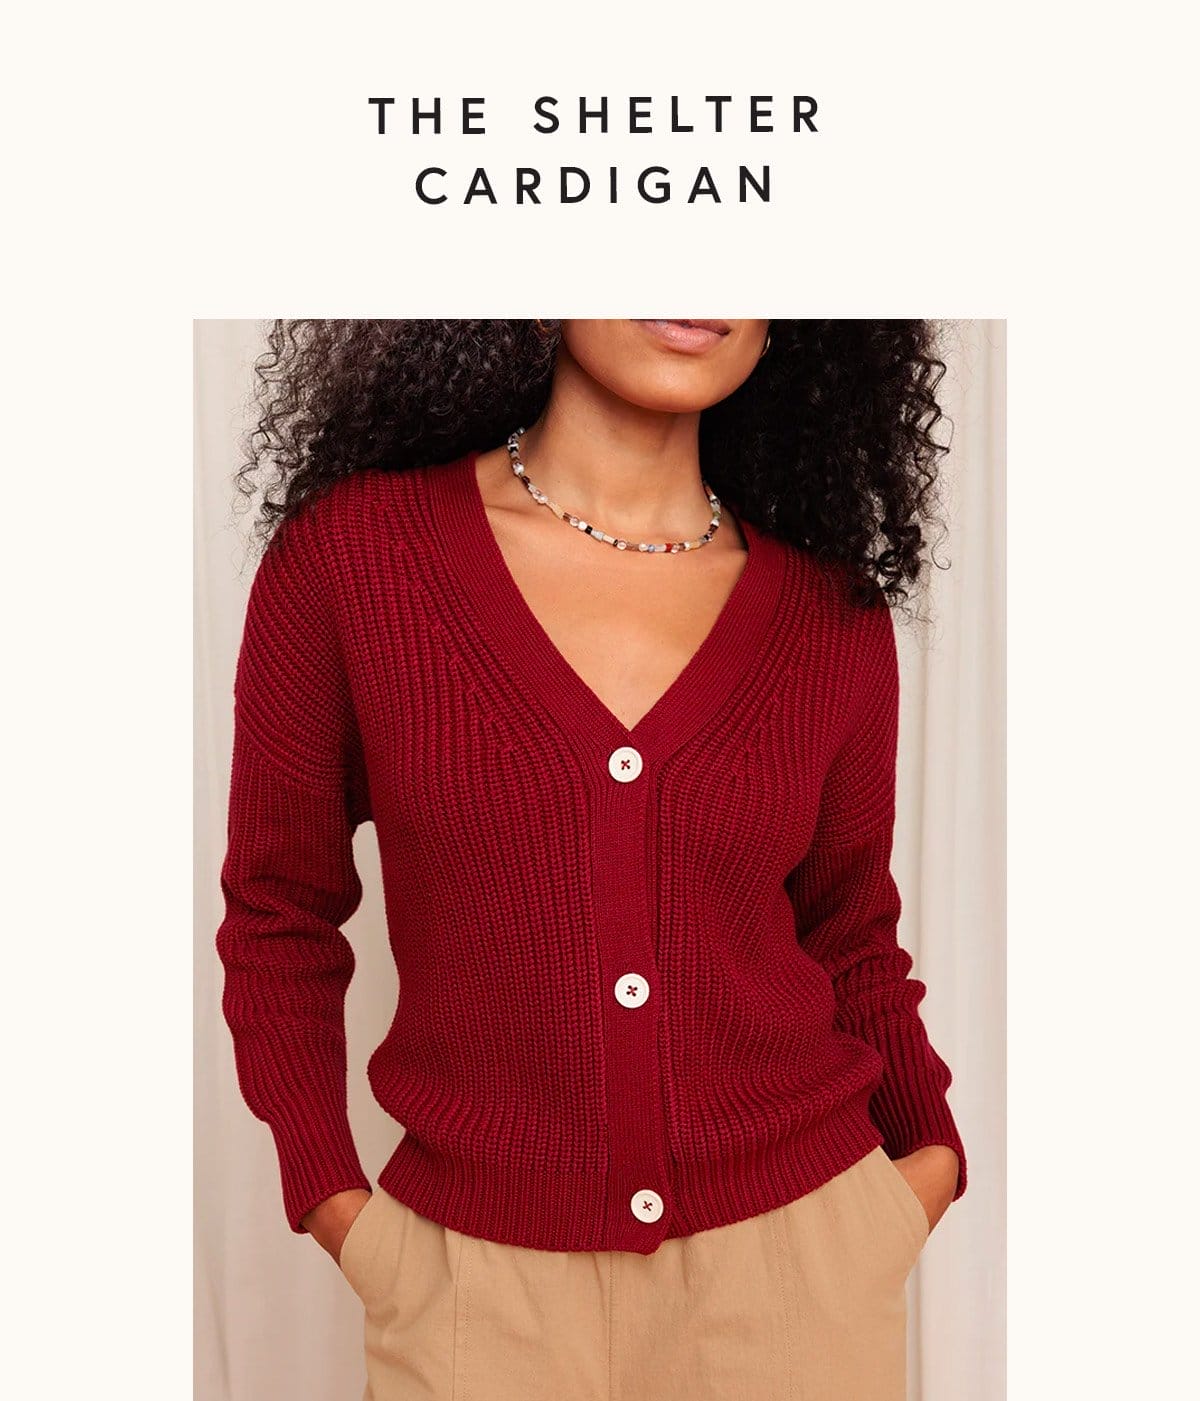 The Shelter Cardigan Our signature sweater. Cozy, heirloom-quality, and goes with everything.